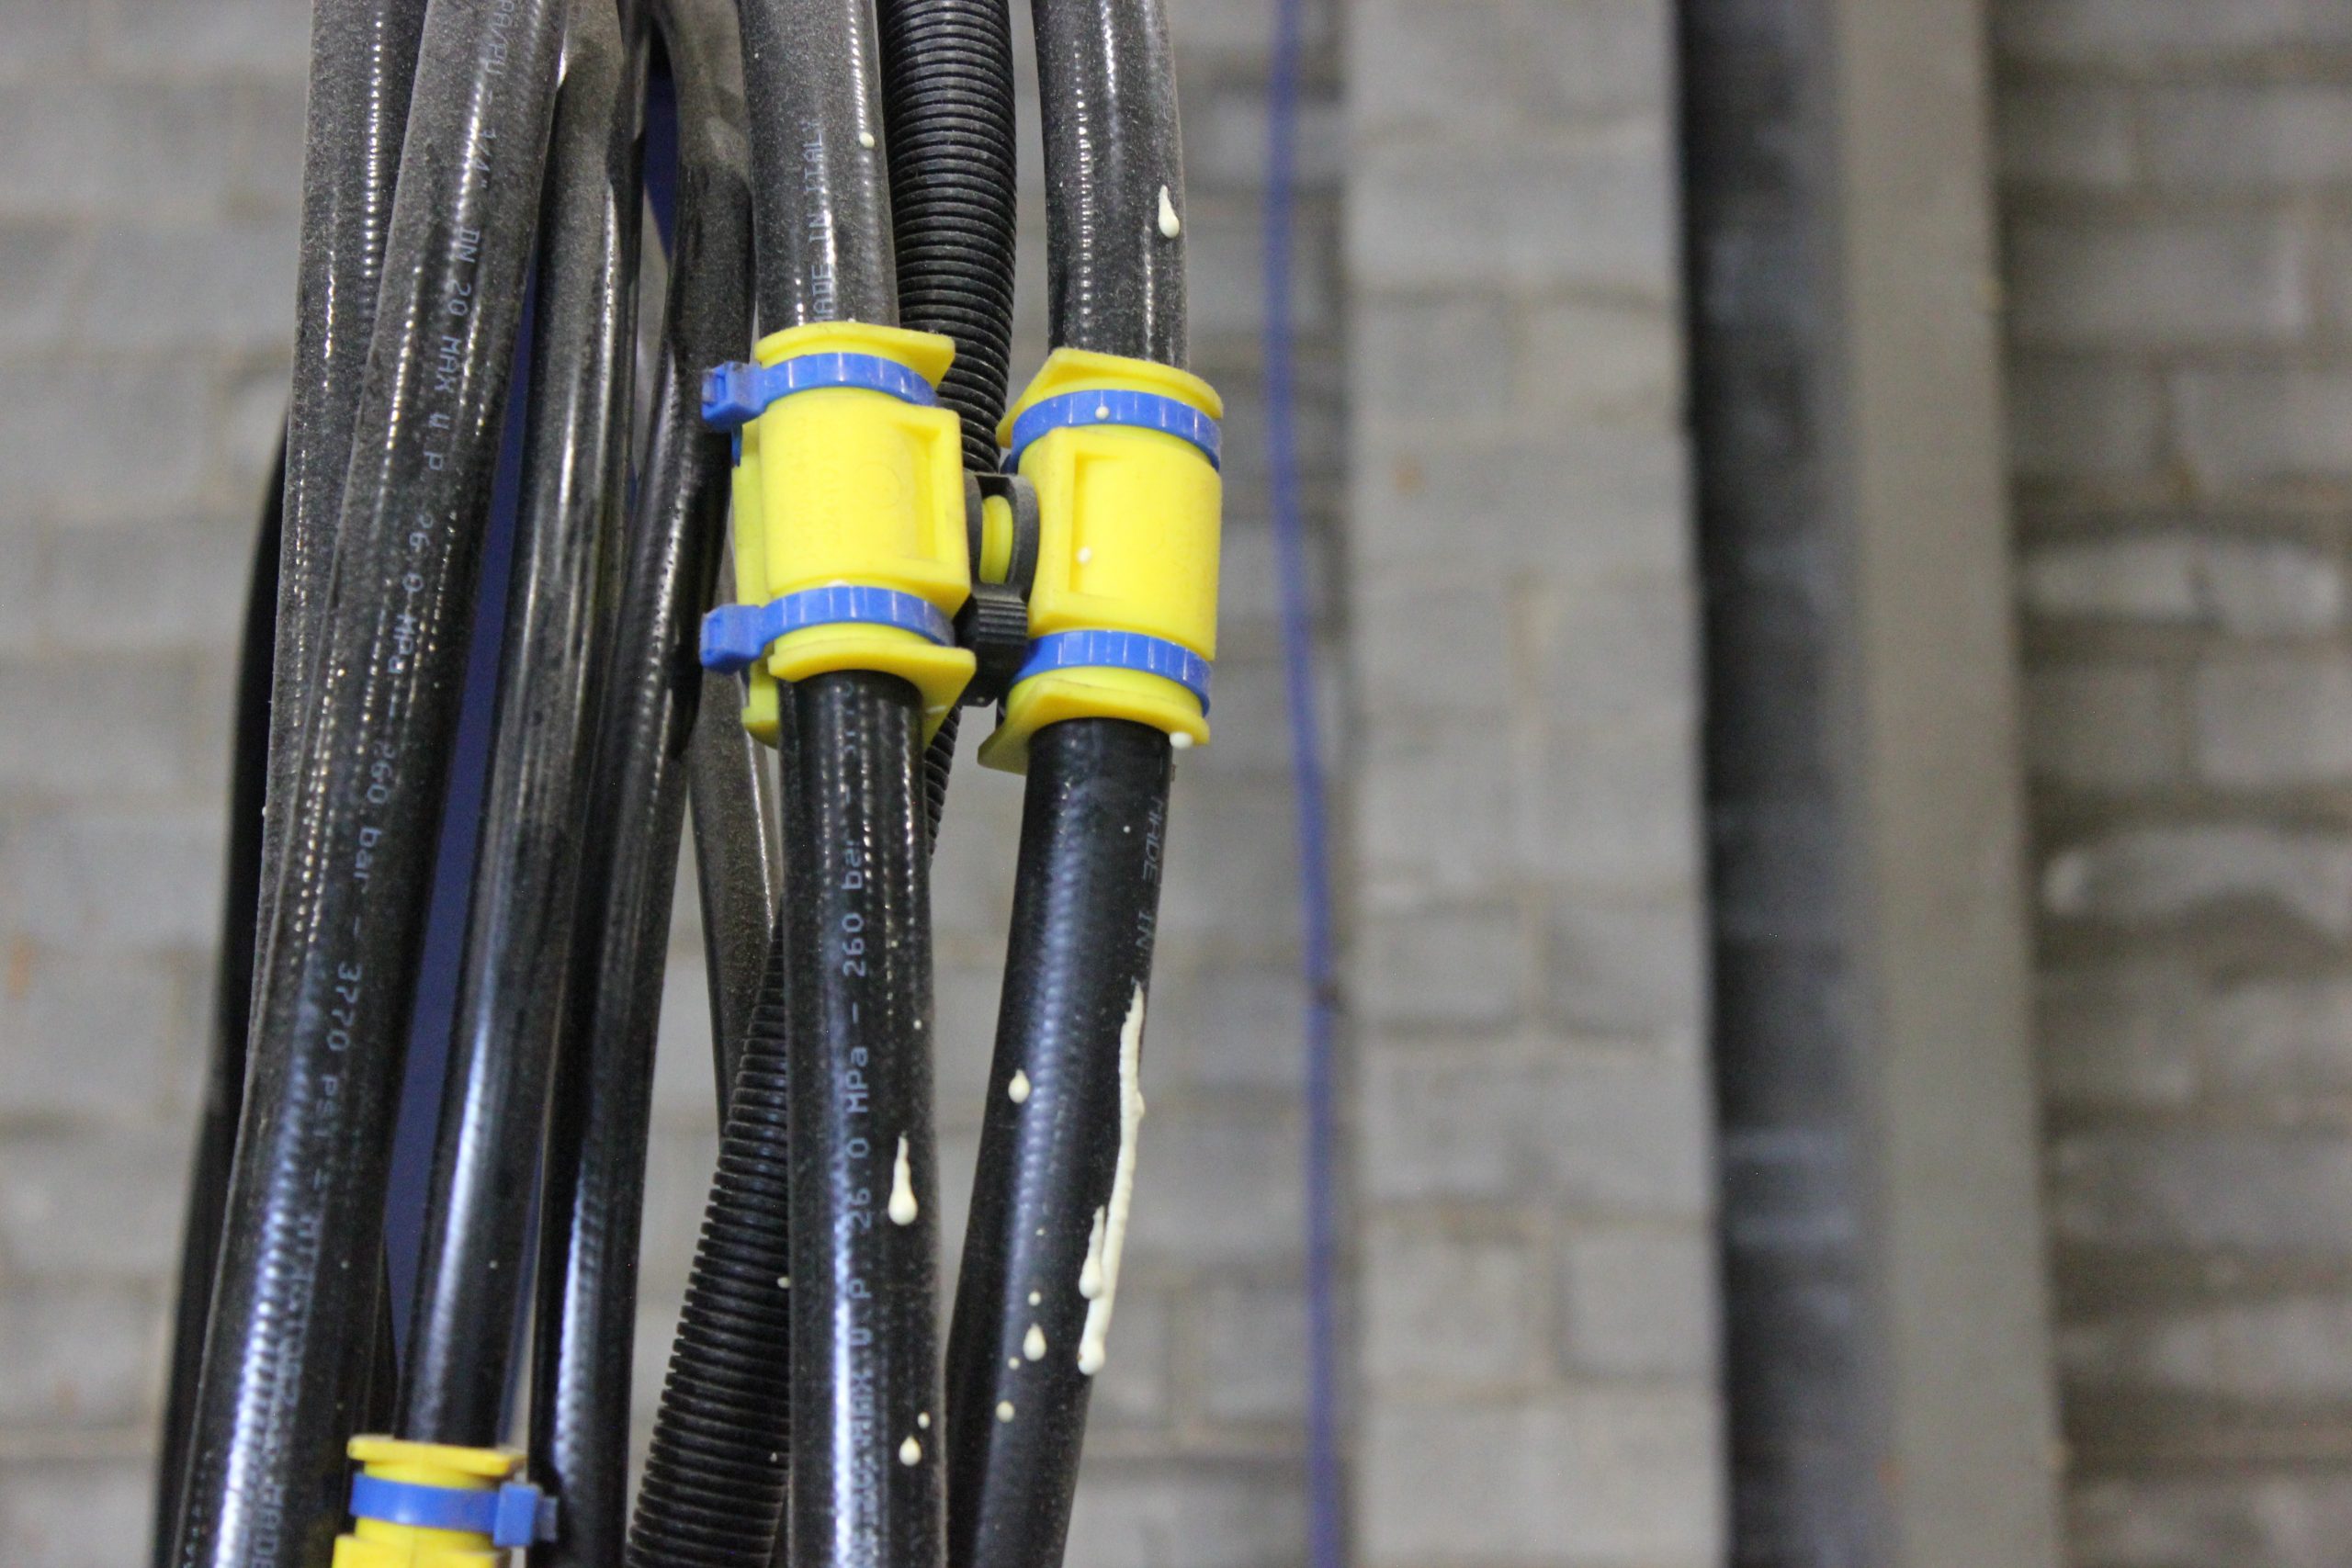 Separate hydraulic hoses in production and manufacturing